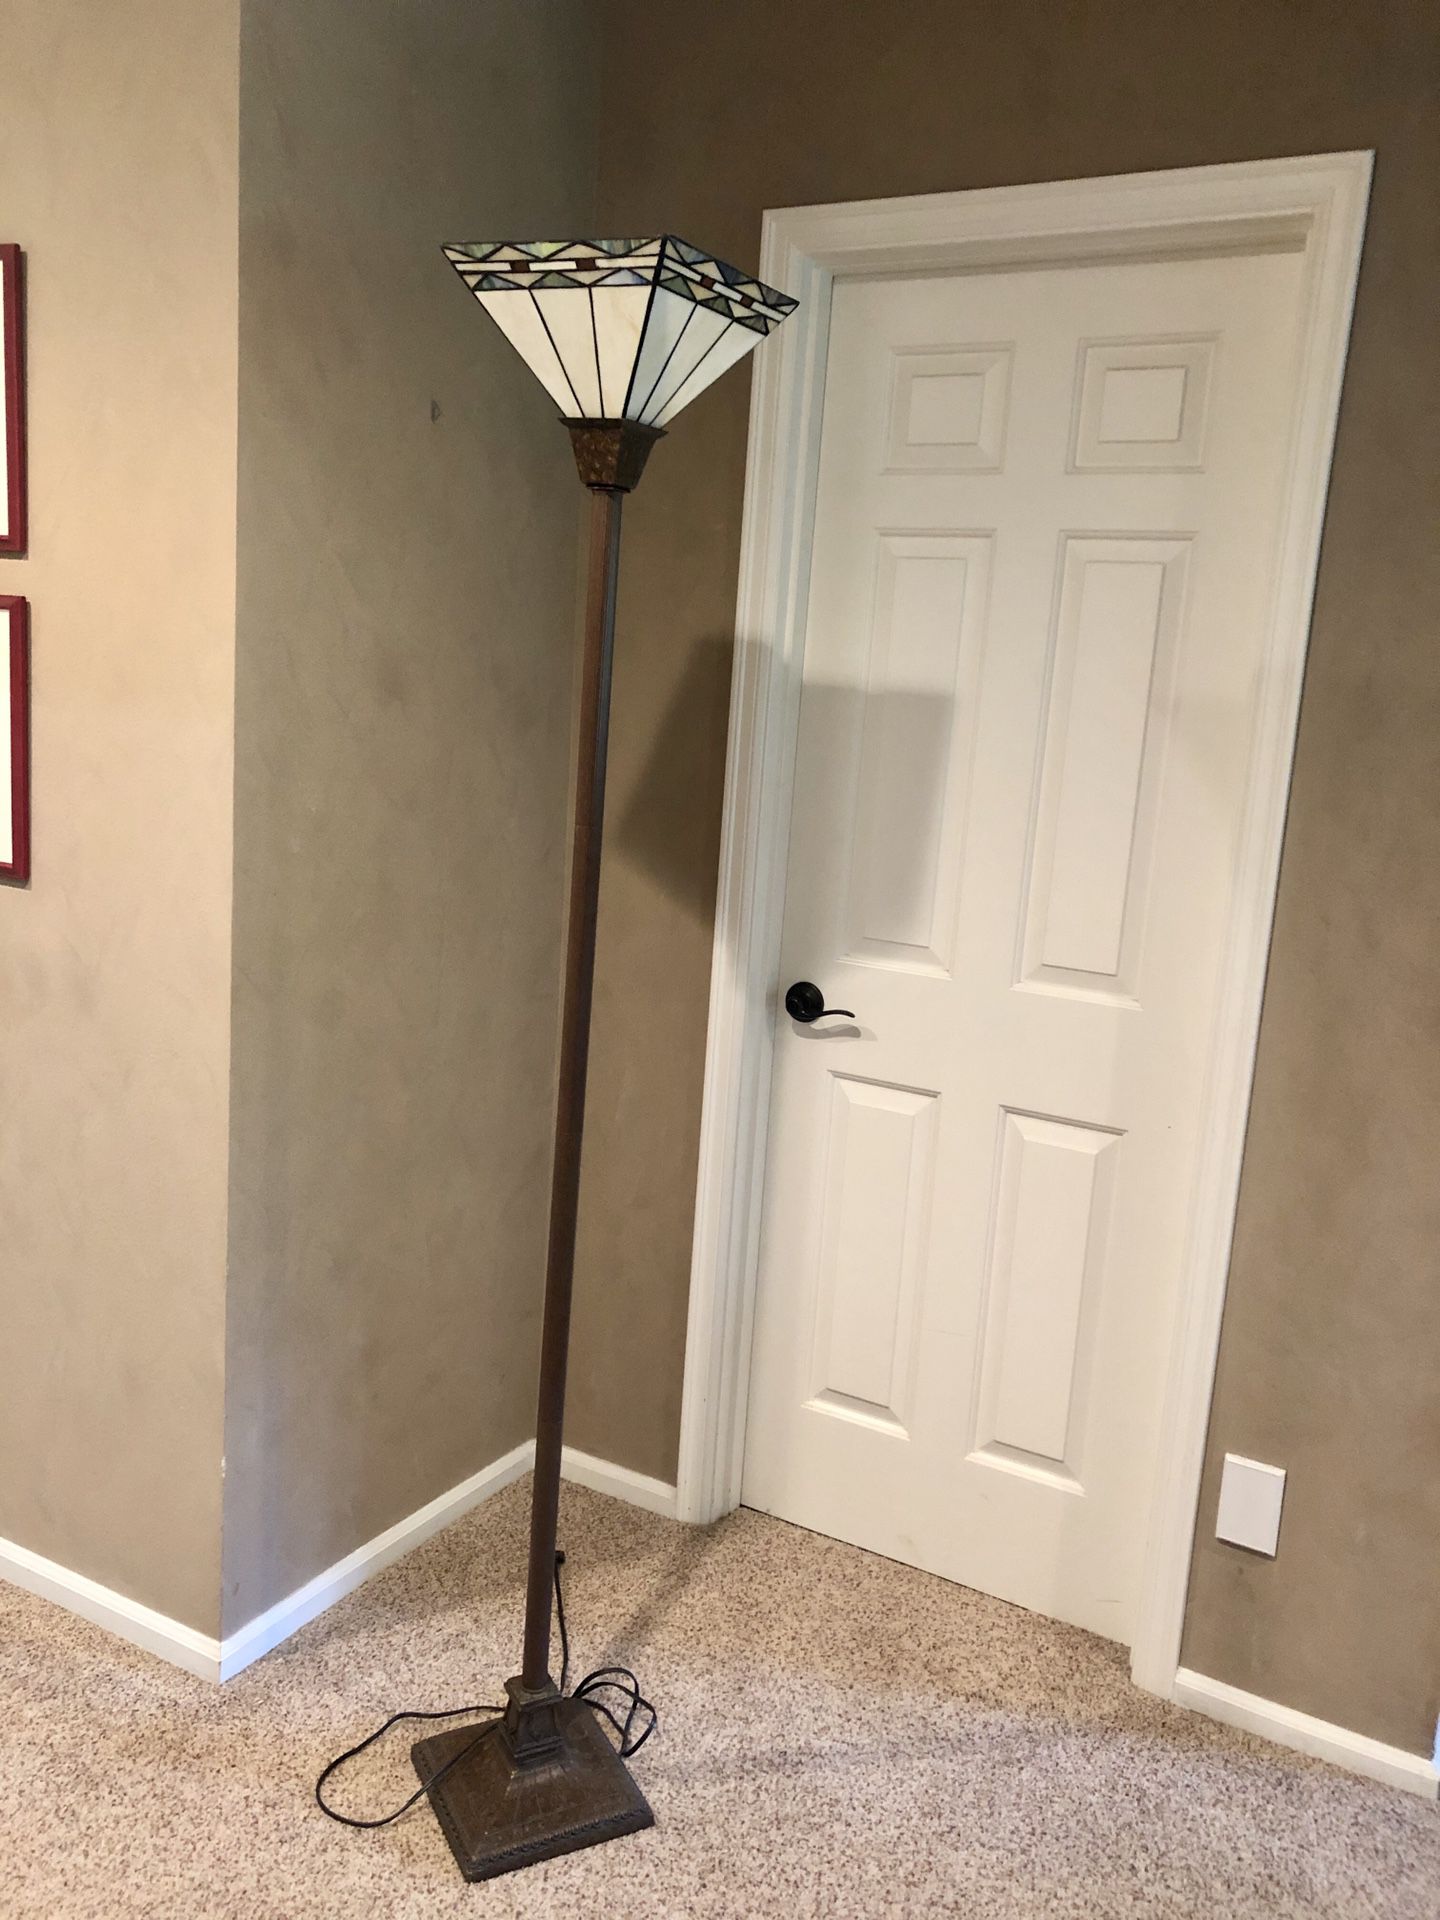 71 in Torchiere Mission style floor lamp